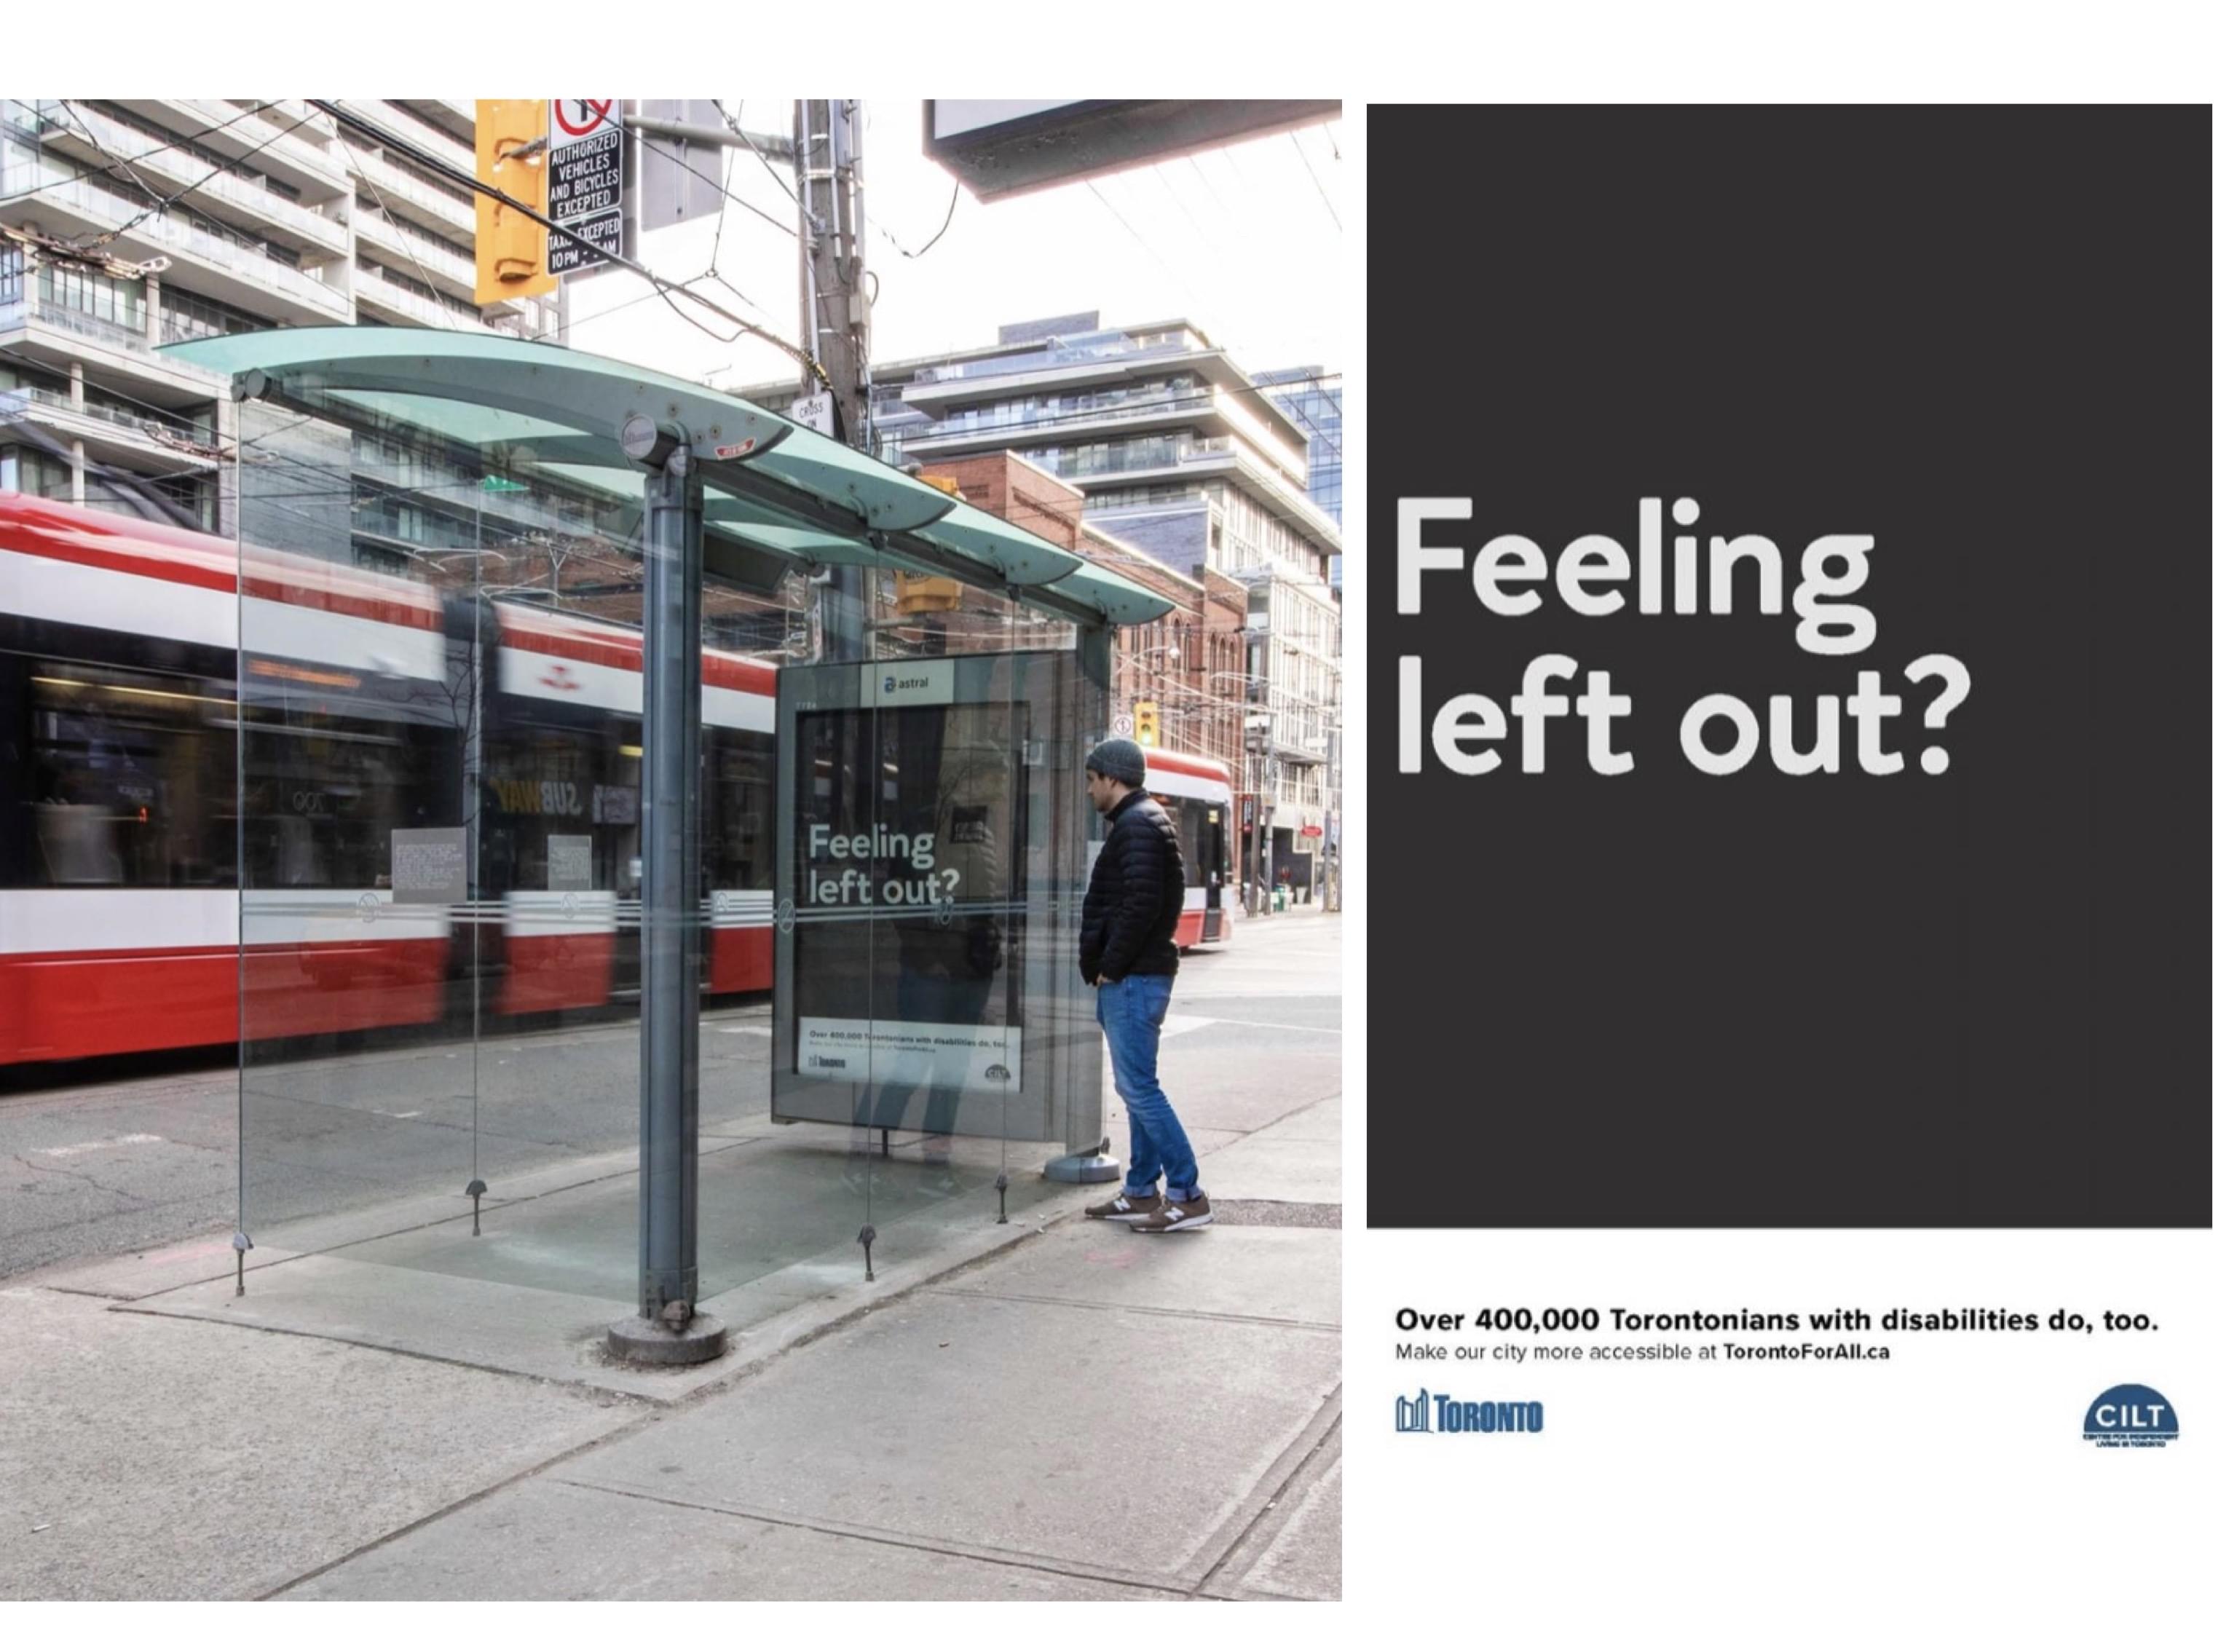 This ambient transit shelter makes people think differently about their interactions in public settings